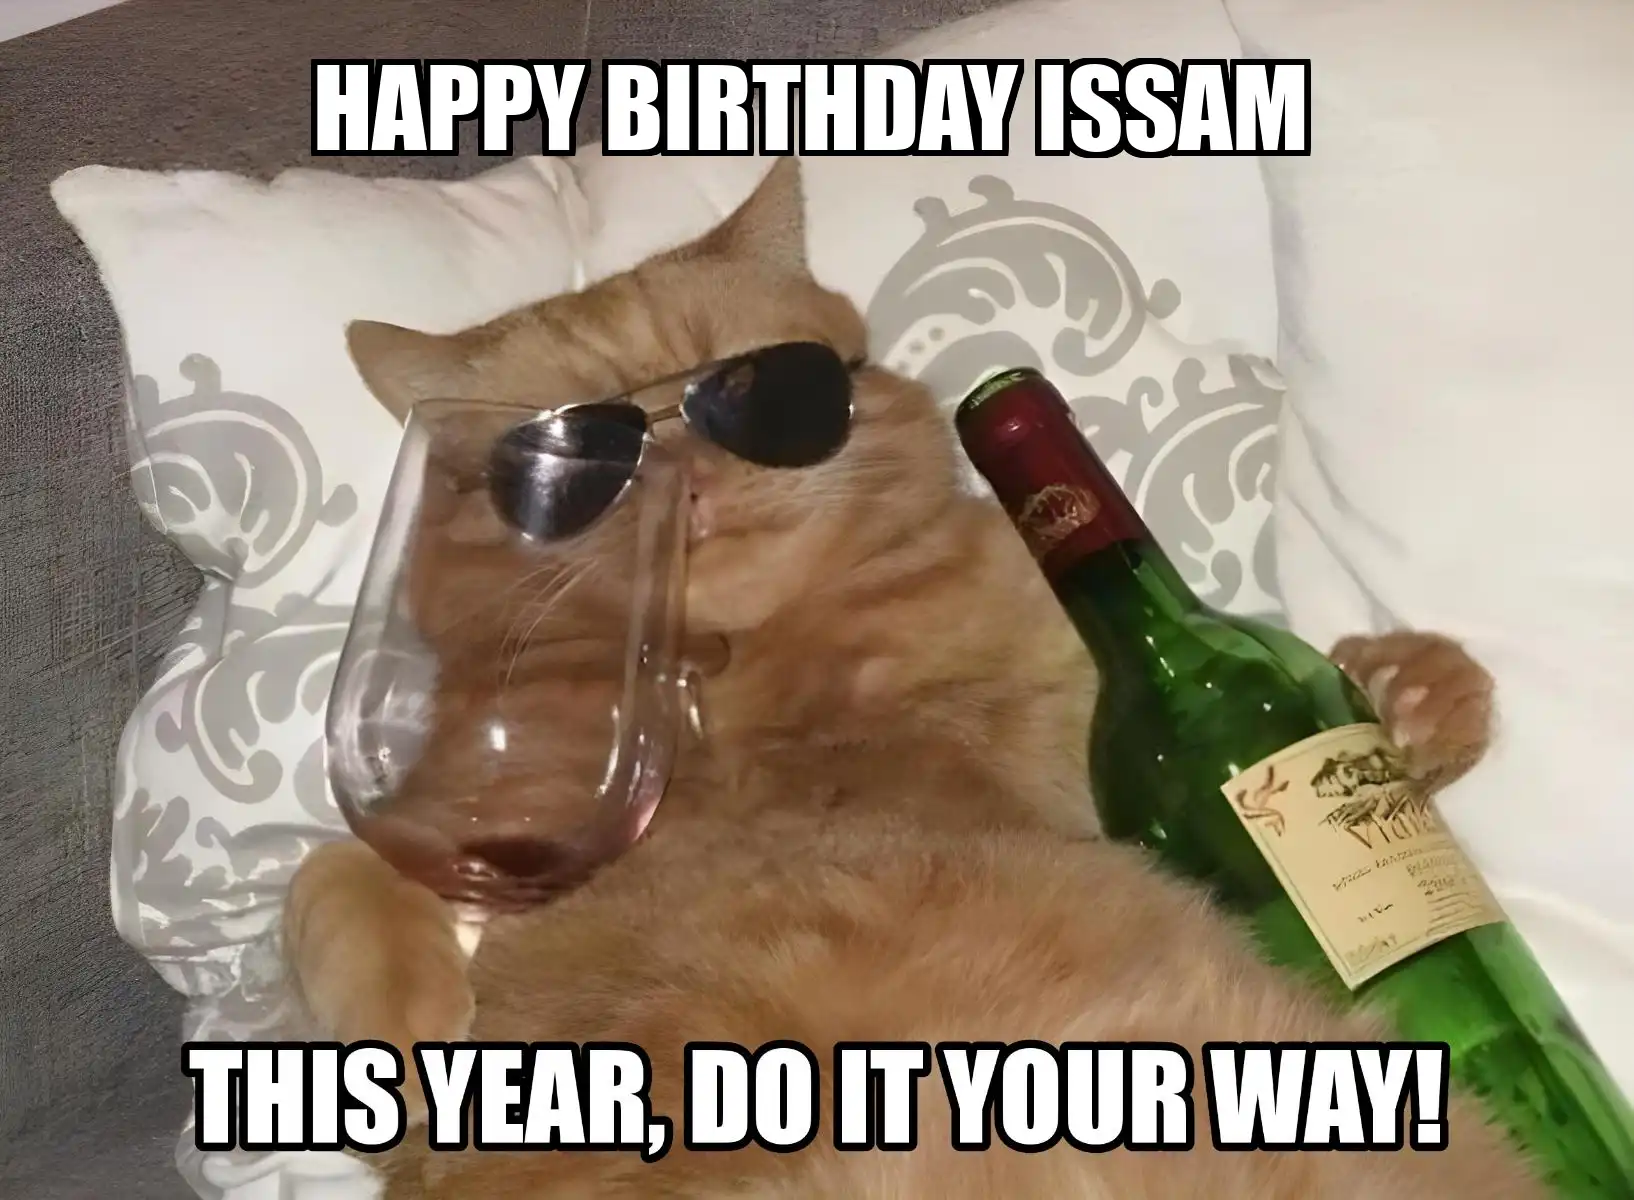 Happy Birthday Issam This Year Do It Your Way Meme